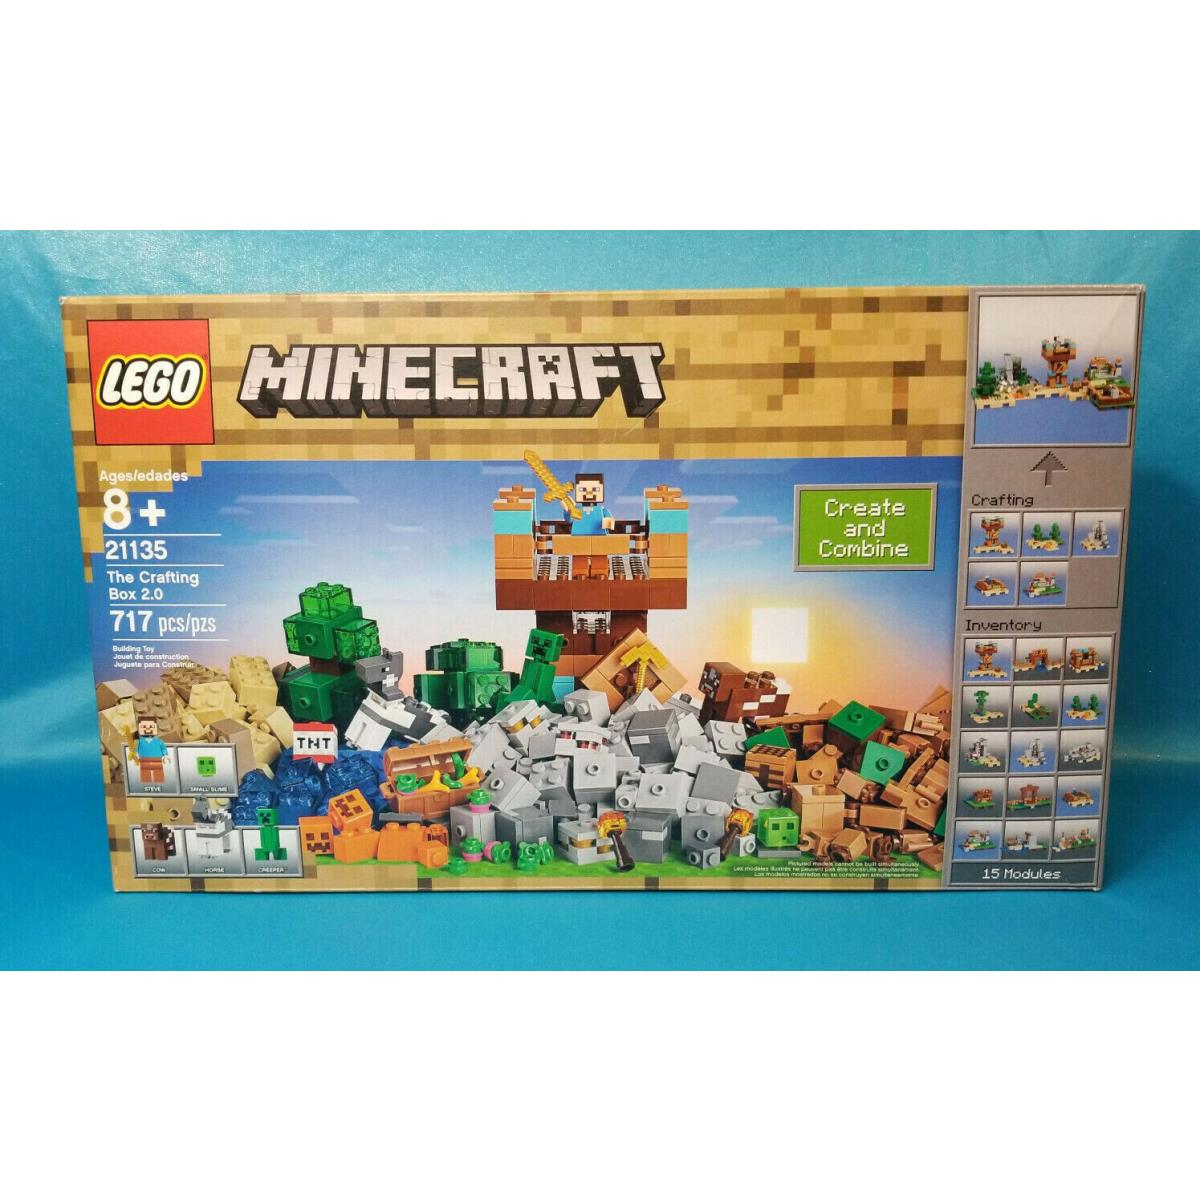 Lego Minecraft 21135 The Crafting Box 2.0 Retired 717 Pieces